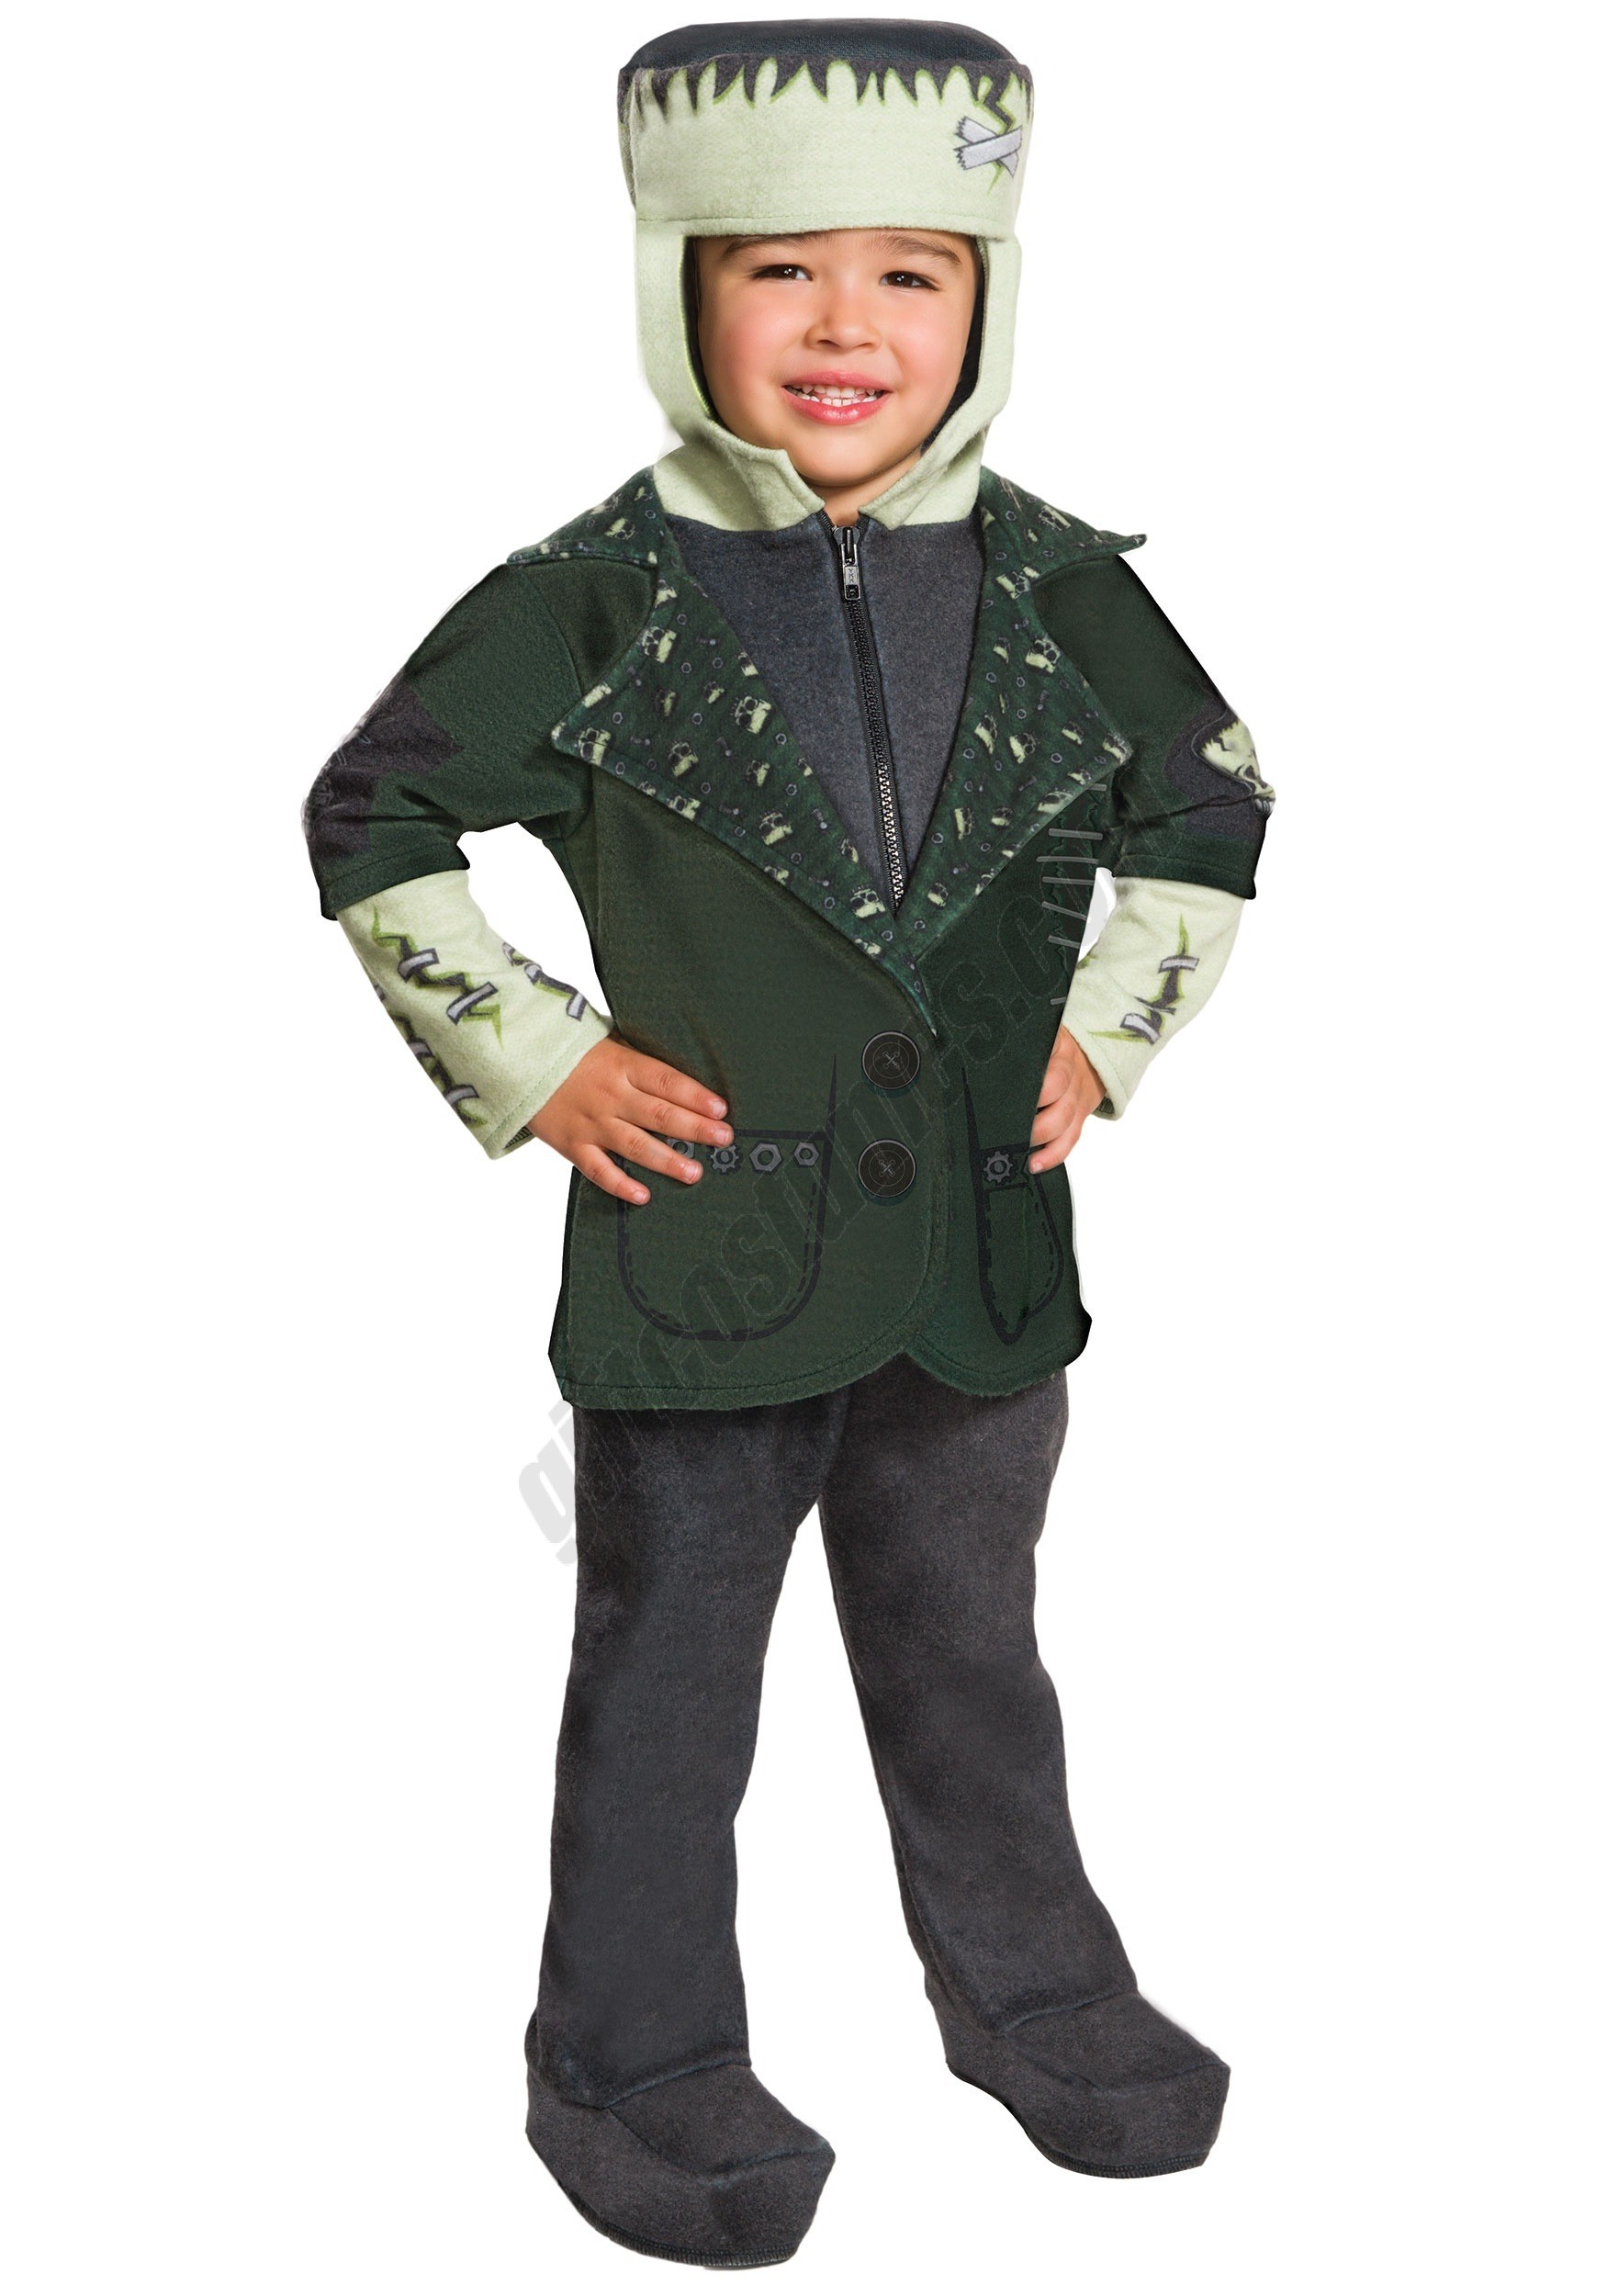 Frankenstein Costume for Toddlers Promotions - Frankenstein Costume for Toddlers Promotions